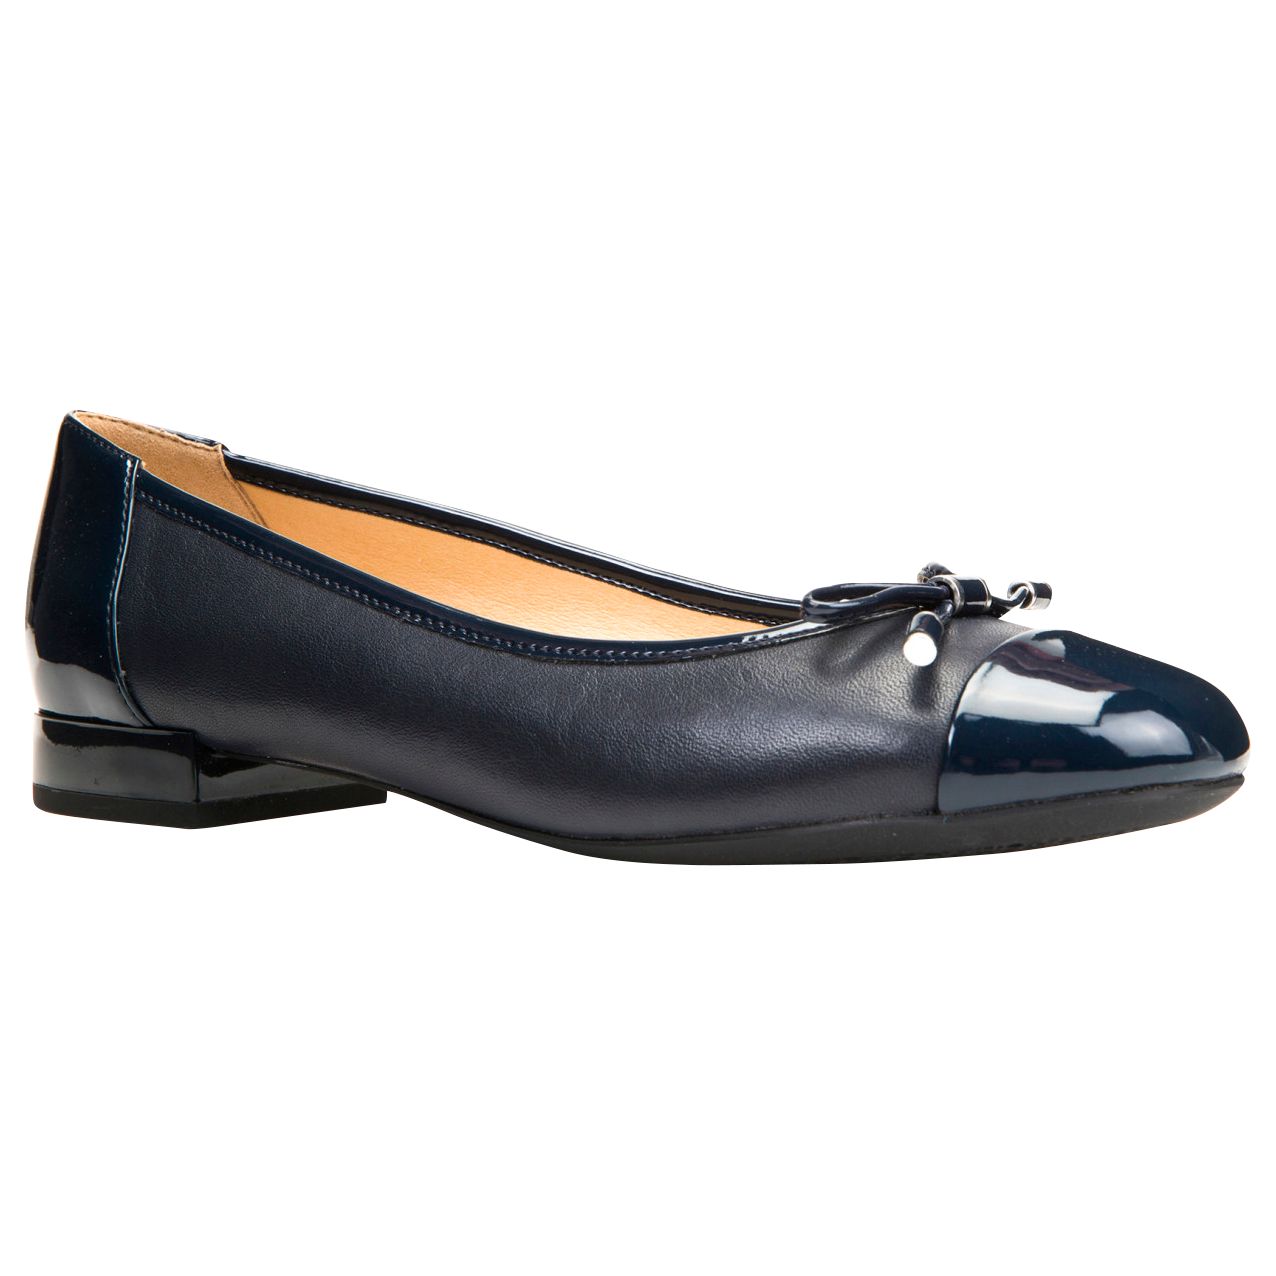 Geox Women's Wistrey Breathable Ballet Pumps, Navy Leather, 5.5